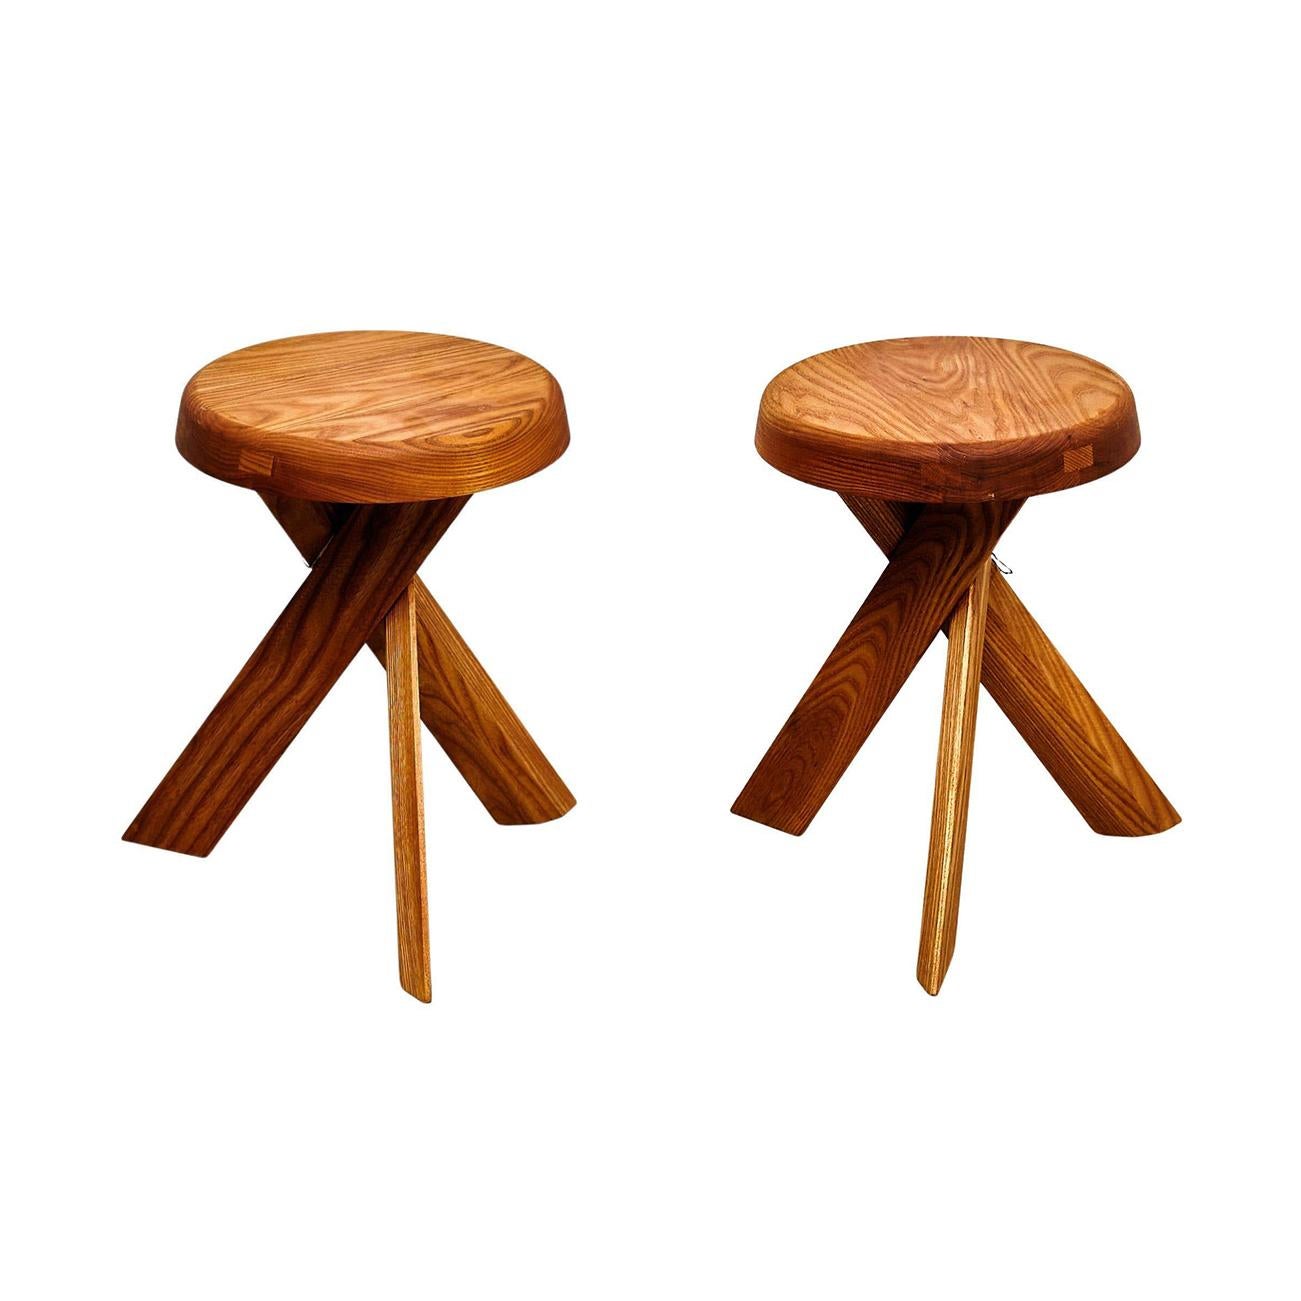 Pair of S 31 B stool designed by Pierre Chapo, circa 1960.
Manufactured by Chapo Creation in France, 2021
Stamped solid elmwood.

In good original condition, with minor wear consistent with age and use, preserving a beautiful patina.

Pierre Chapo